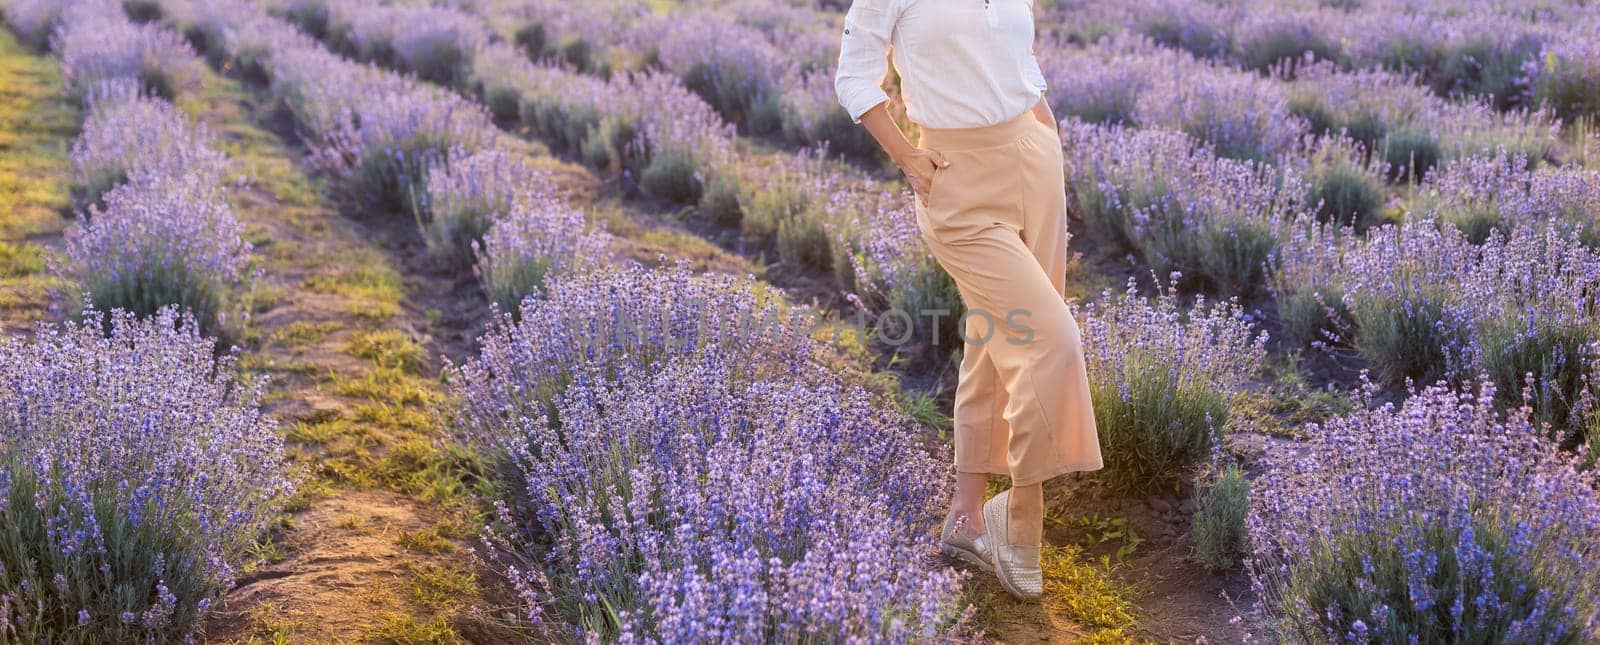 Young blond woman traveller wearing straw hat in lavender field surrounded with lavender flowers. by Andelov13